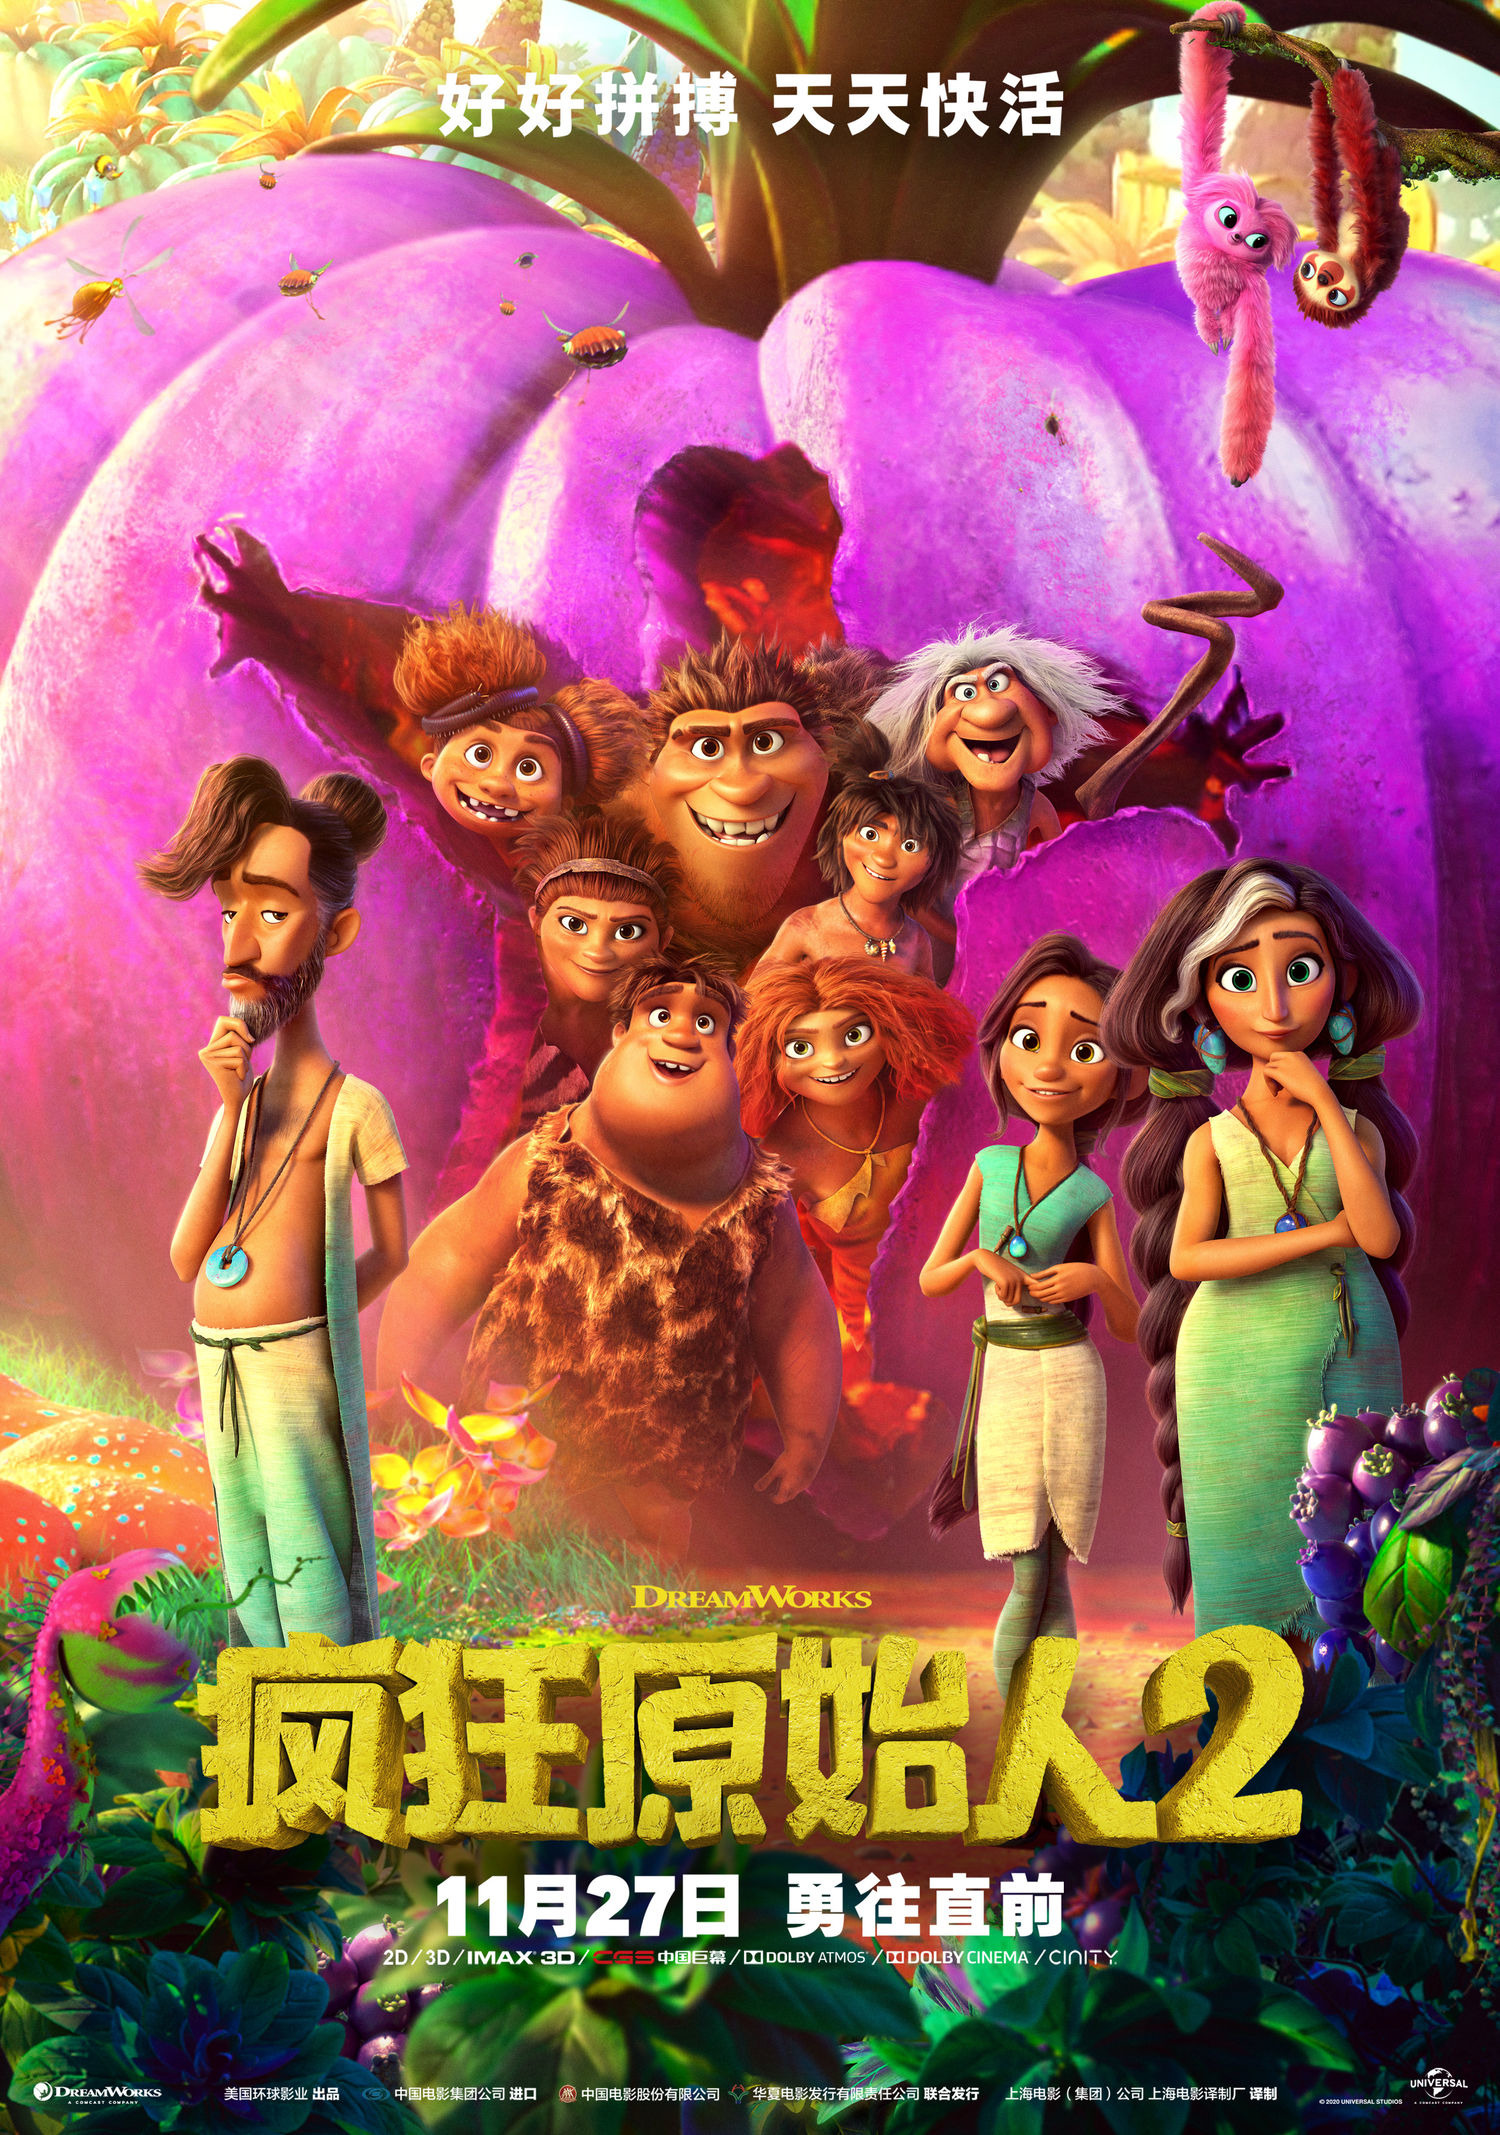 Mega Sized Movie Poster Image for The Croods: A New Age (#5 of 5)